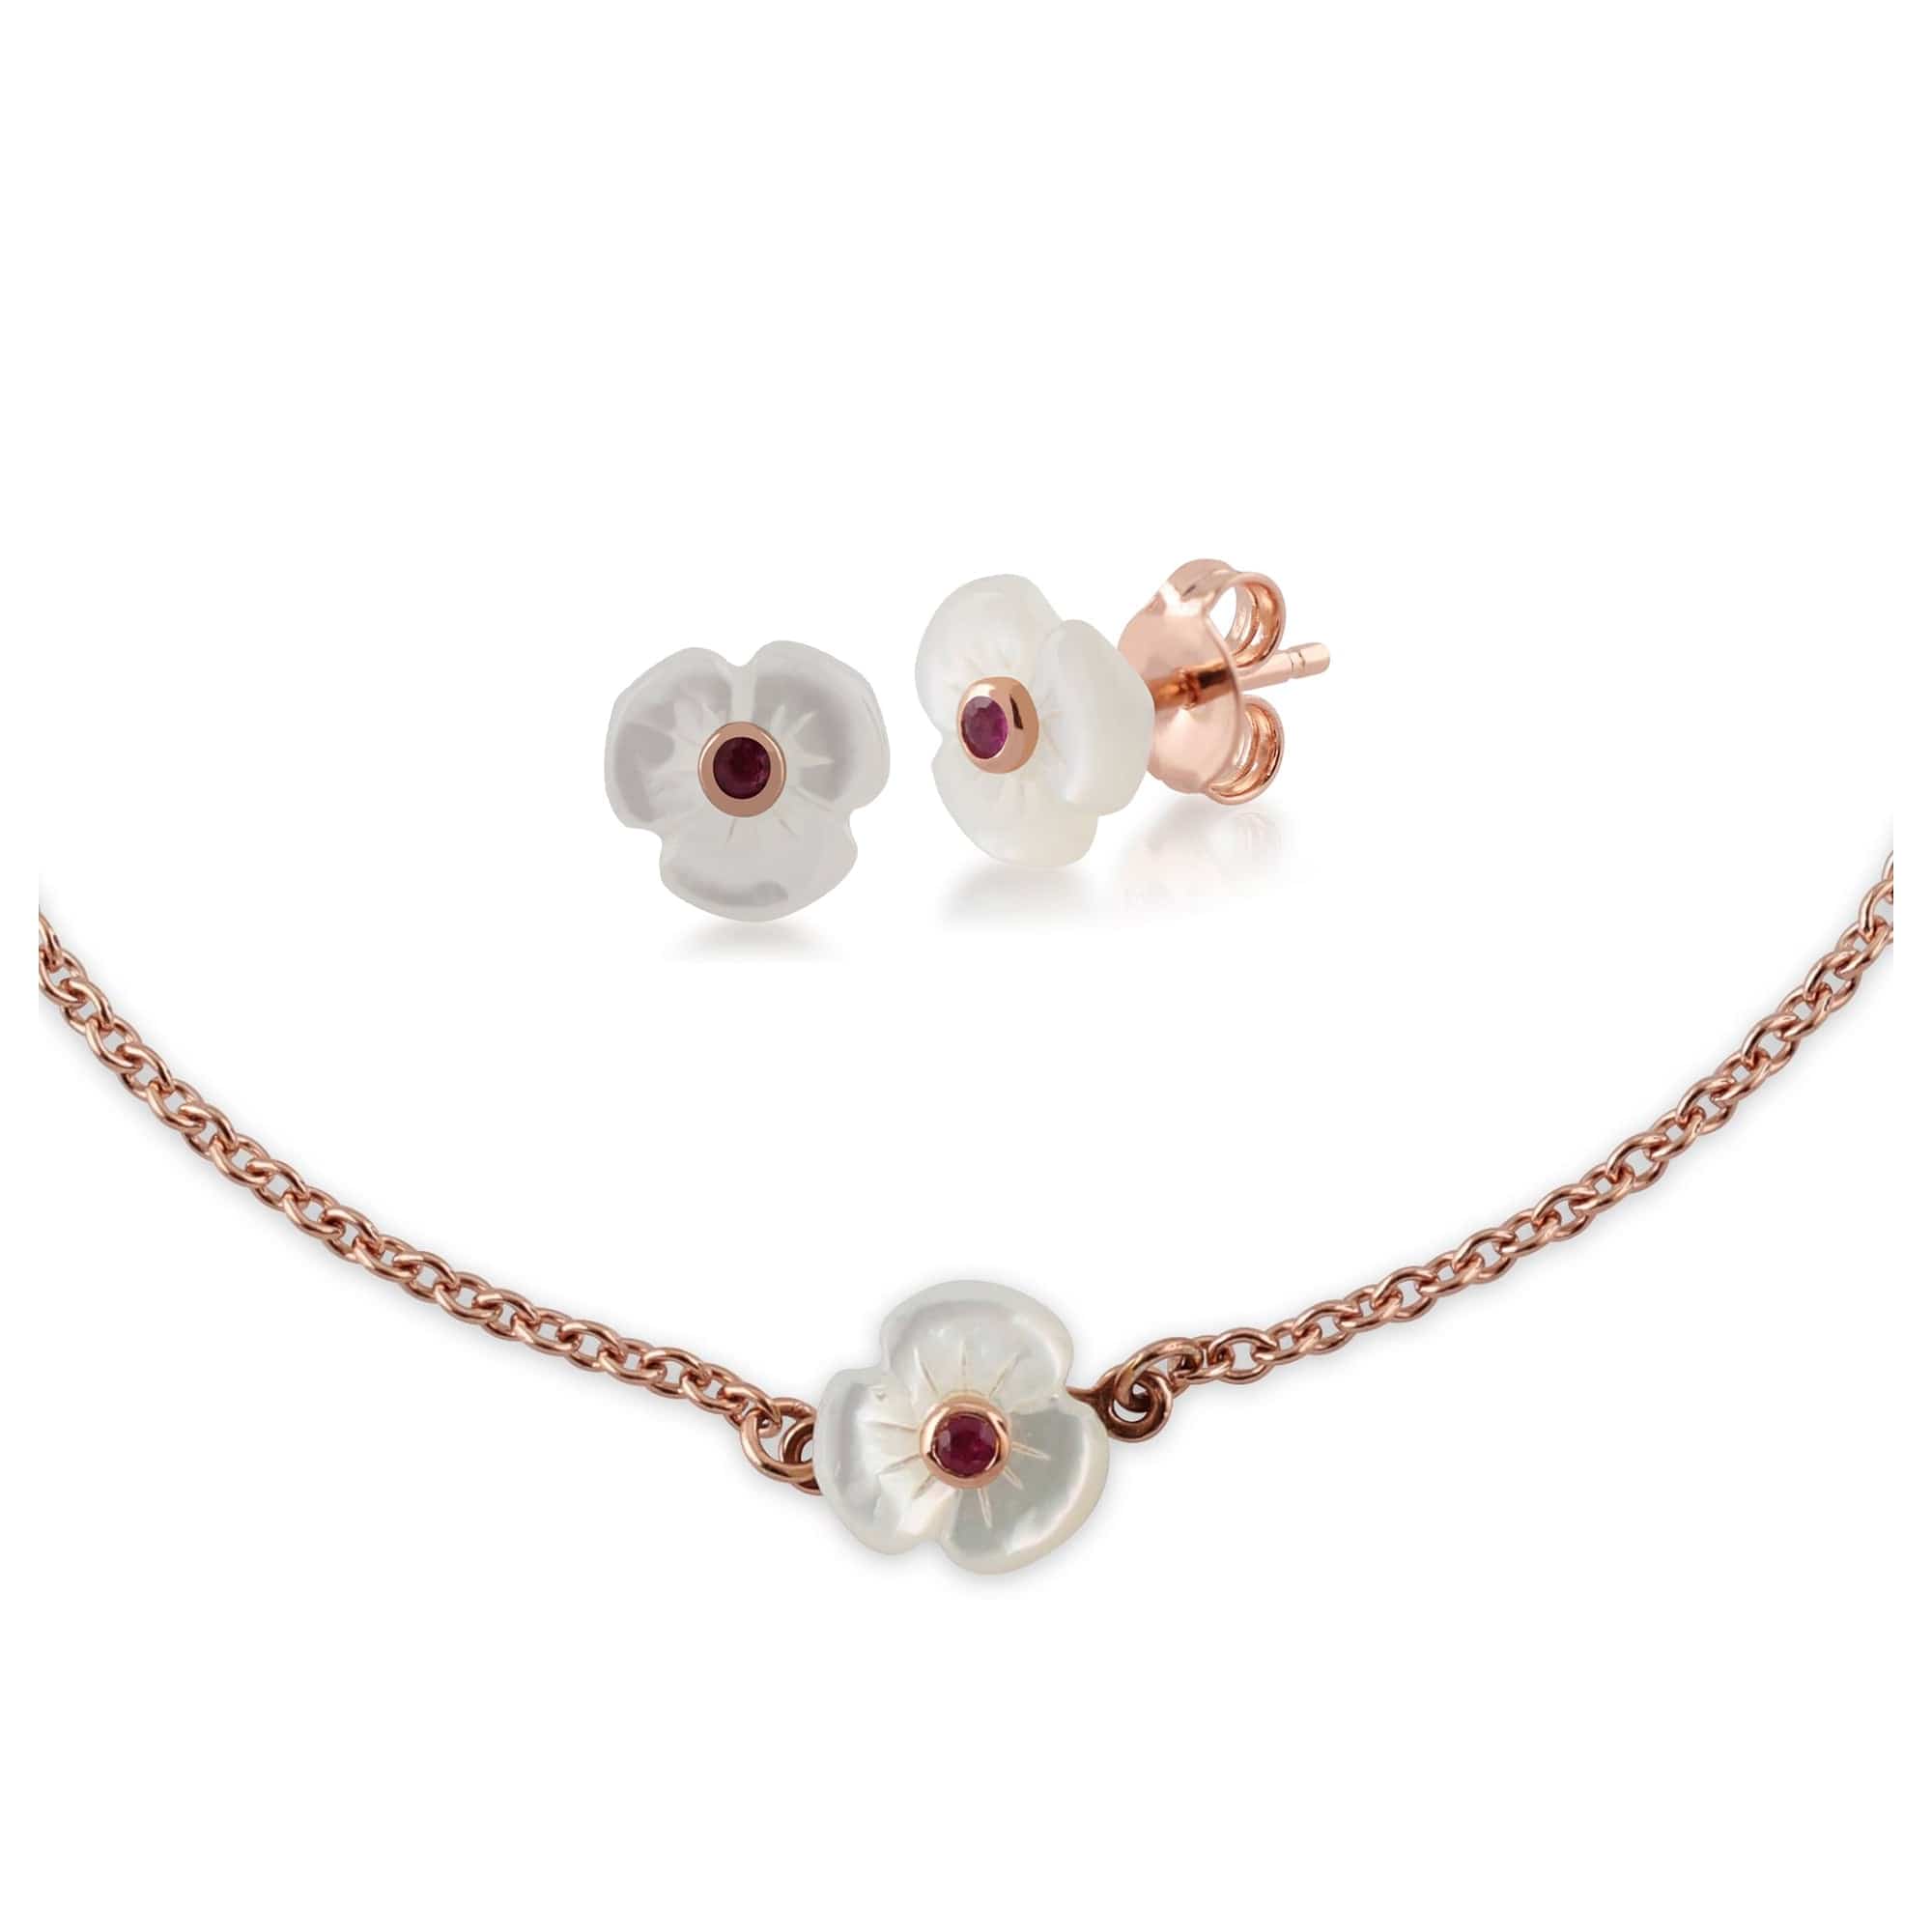 253E224101925-253L098901925 Floral Round Ruby & Mother of Pearl Daisy Stud Earrings & Bracelet Set in Rose Gold Plated 925 Sterling Silver 1